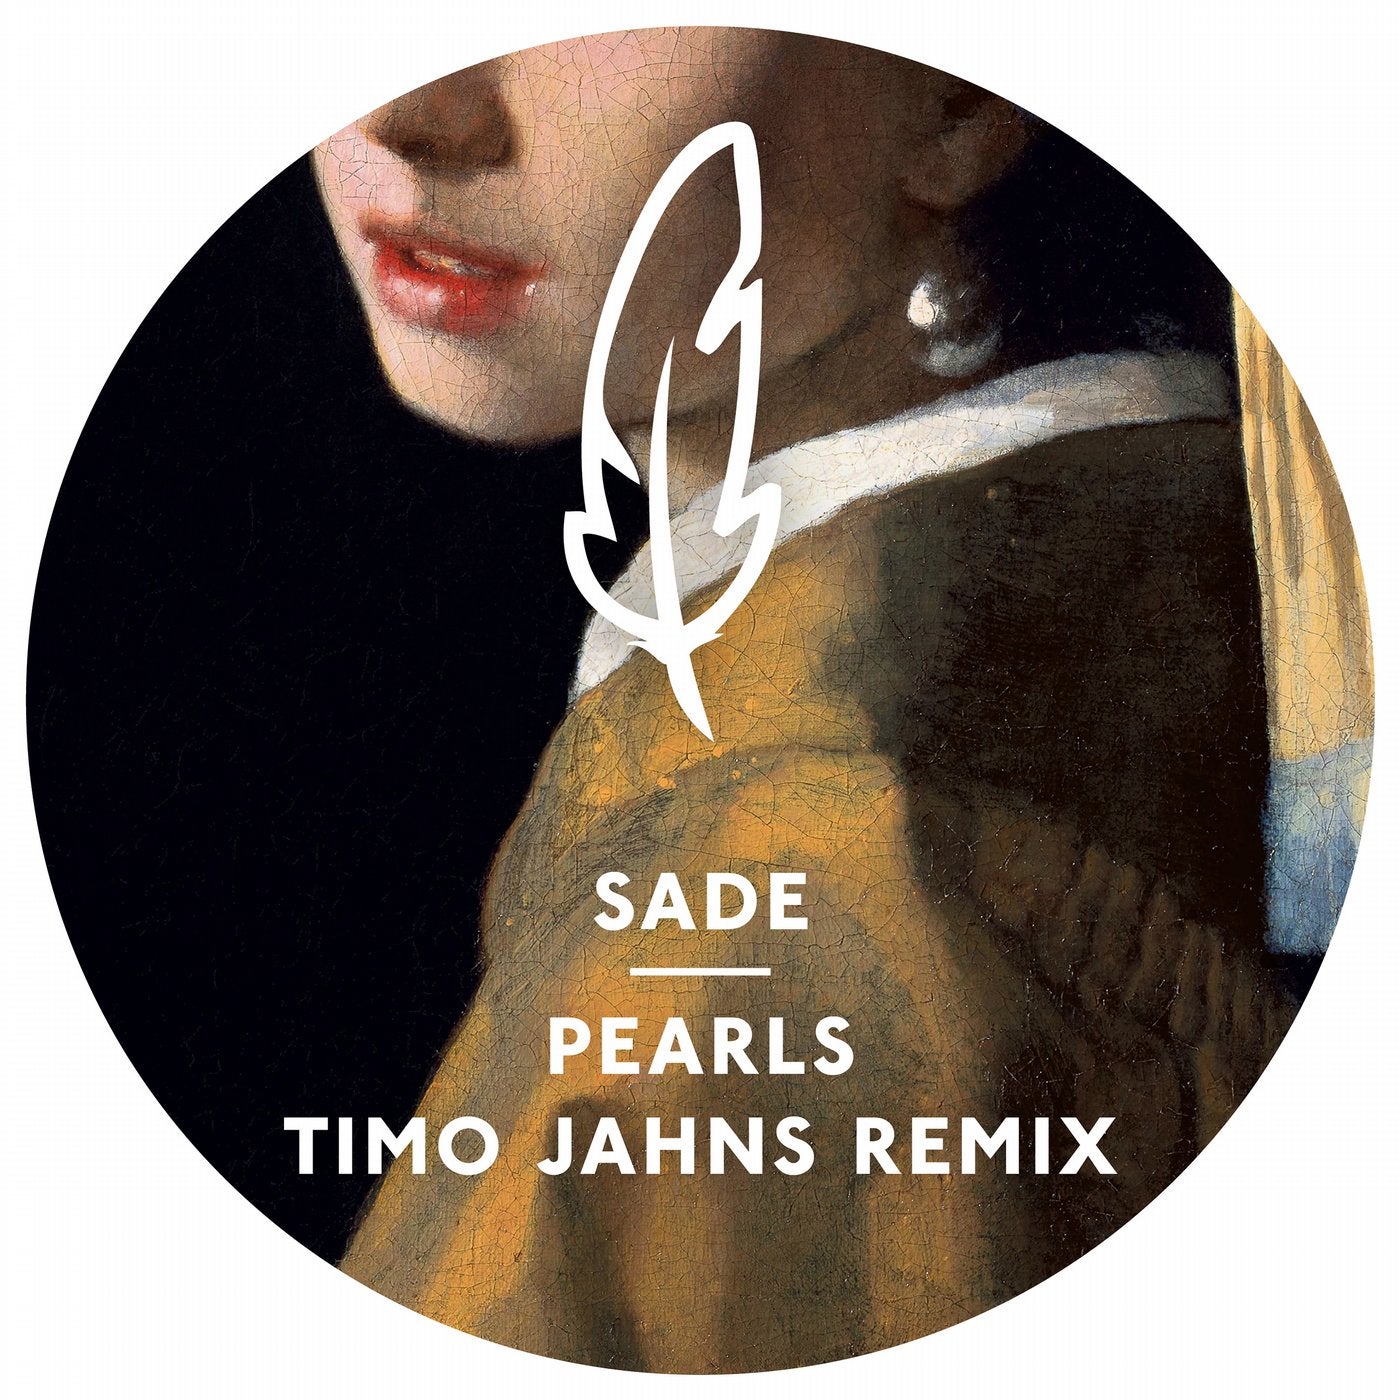 Pearls (Timo Jahns Remix)